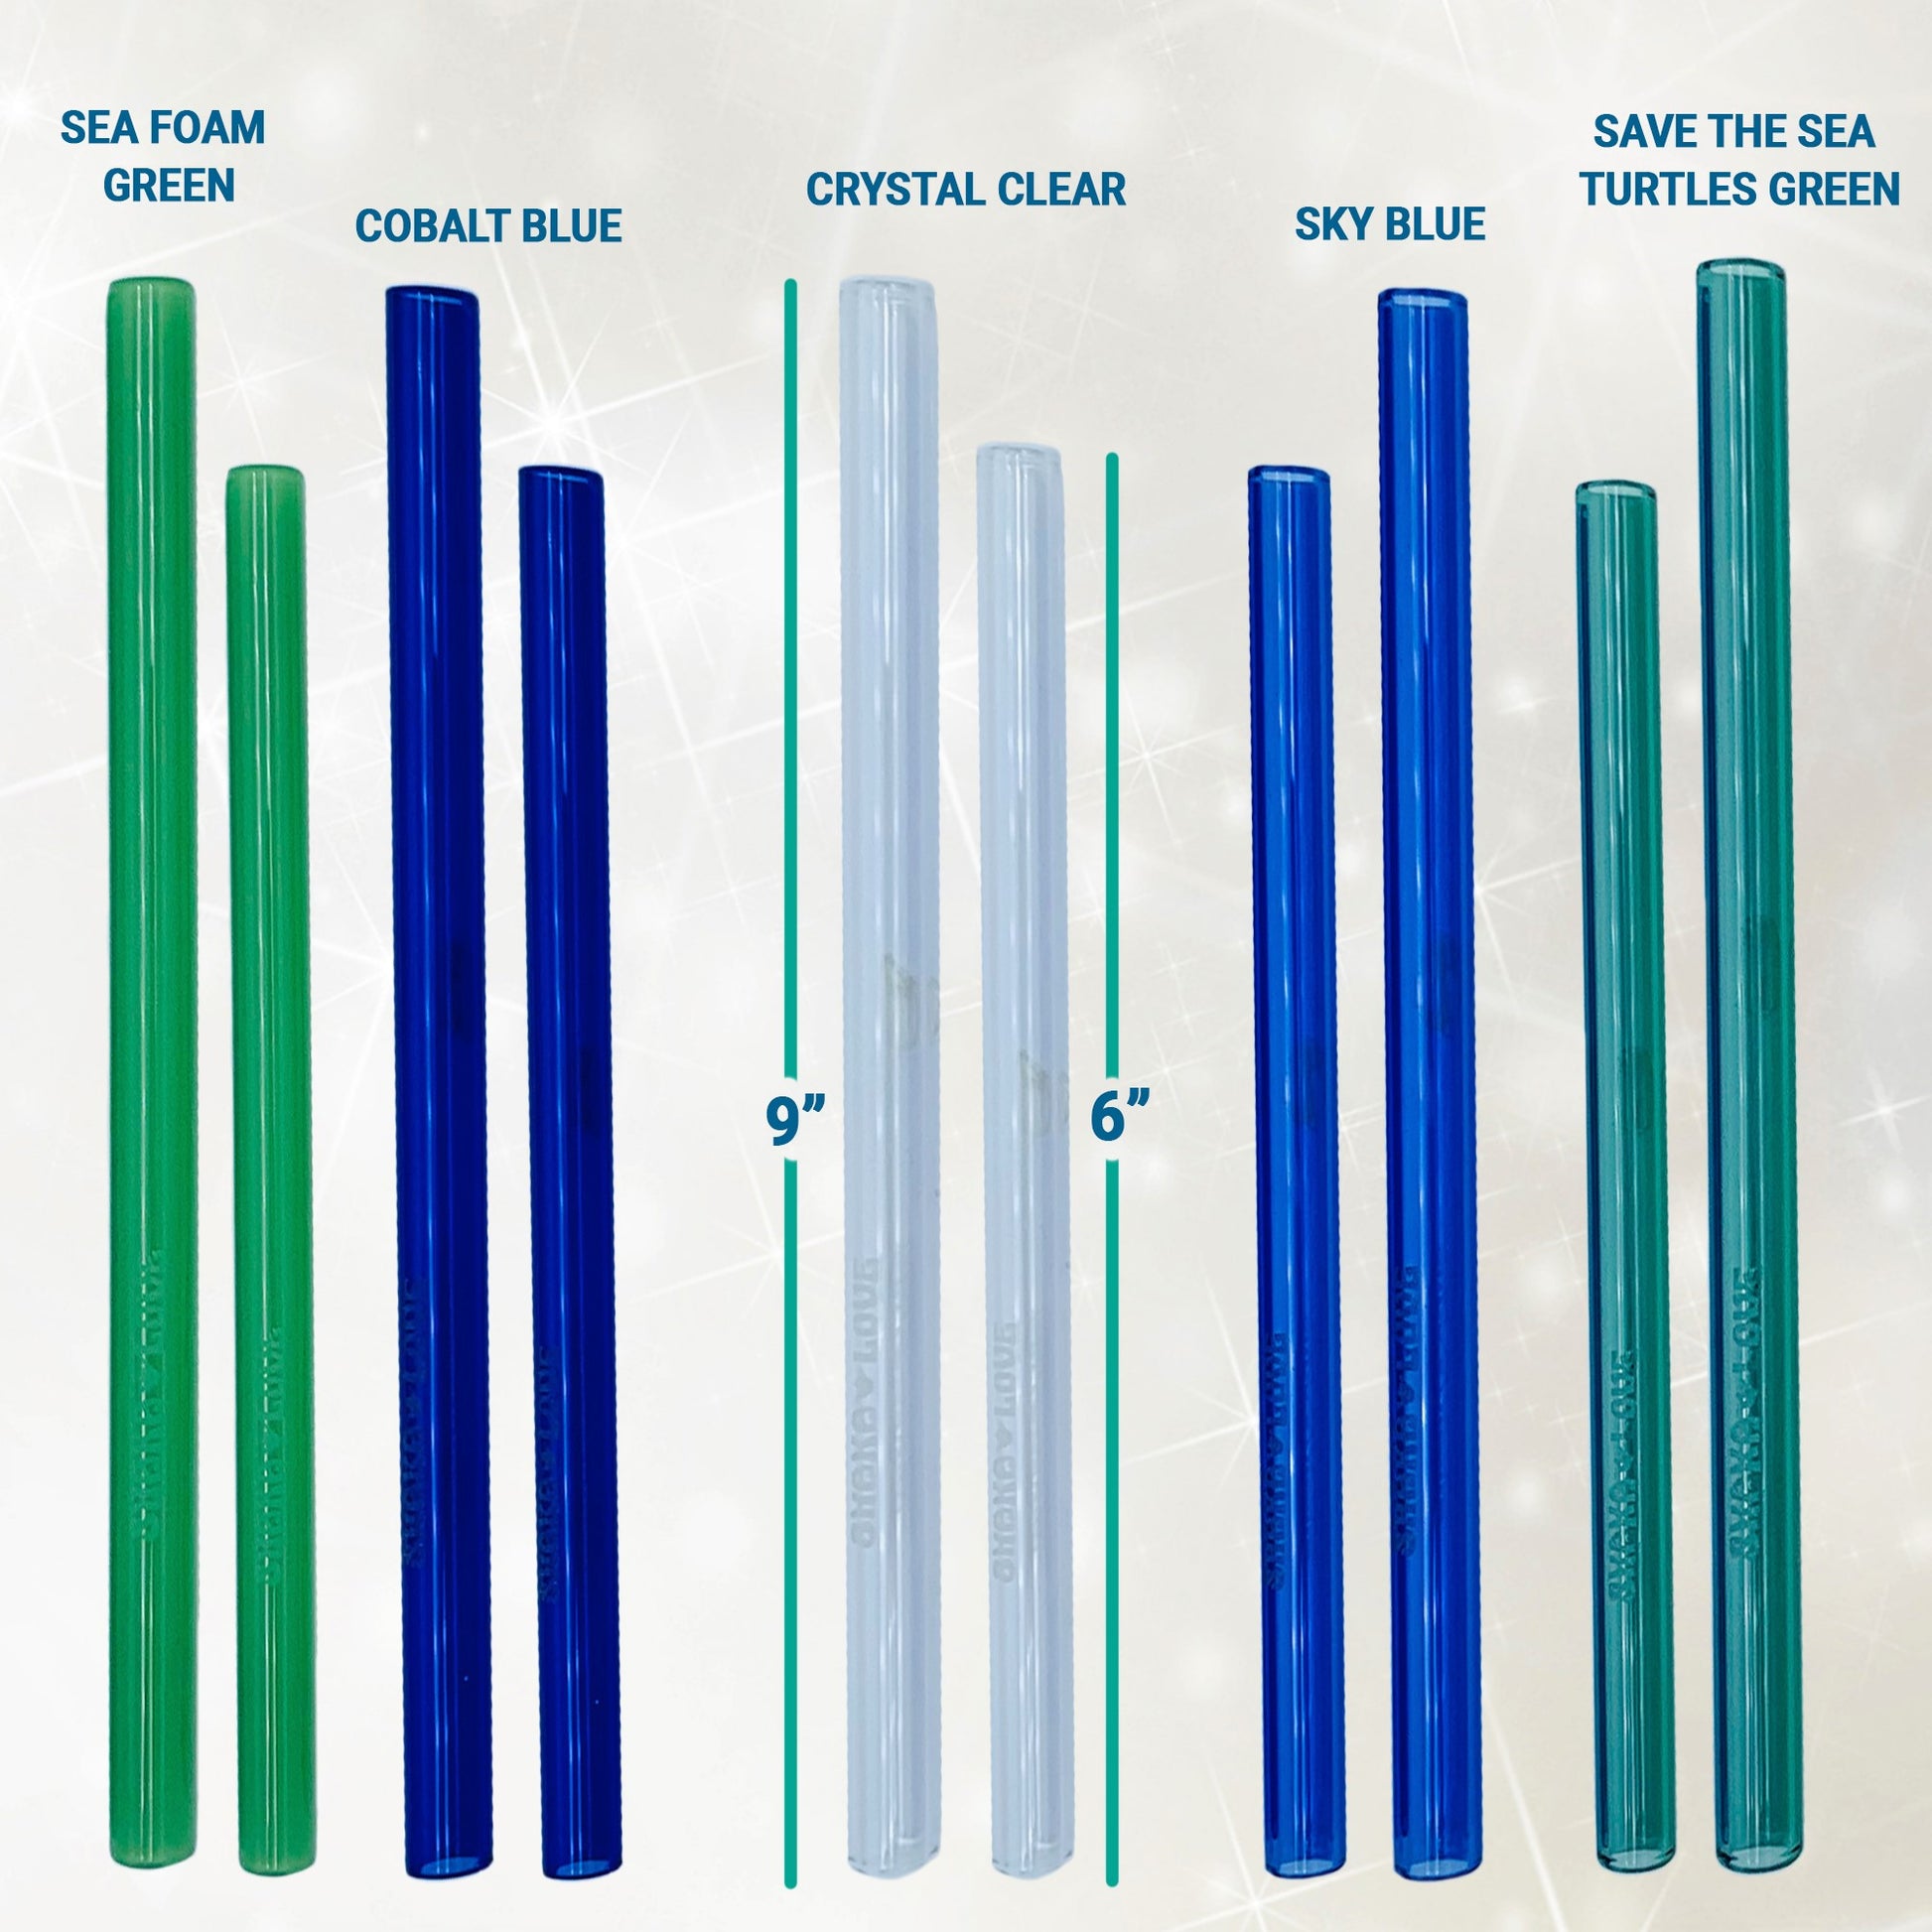 Glass straw set clear sturdy strong glass straws unbreakable glass straws  aloha glass straws straw with purpose best glass straws perfect glass straws  Shaka glass straws Glass Straw Set - ALOHA Mixed